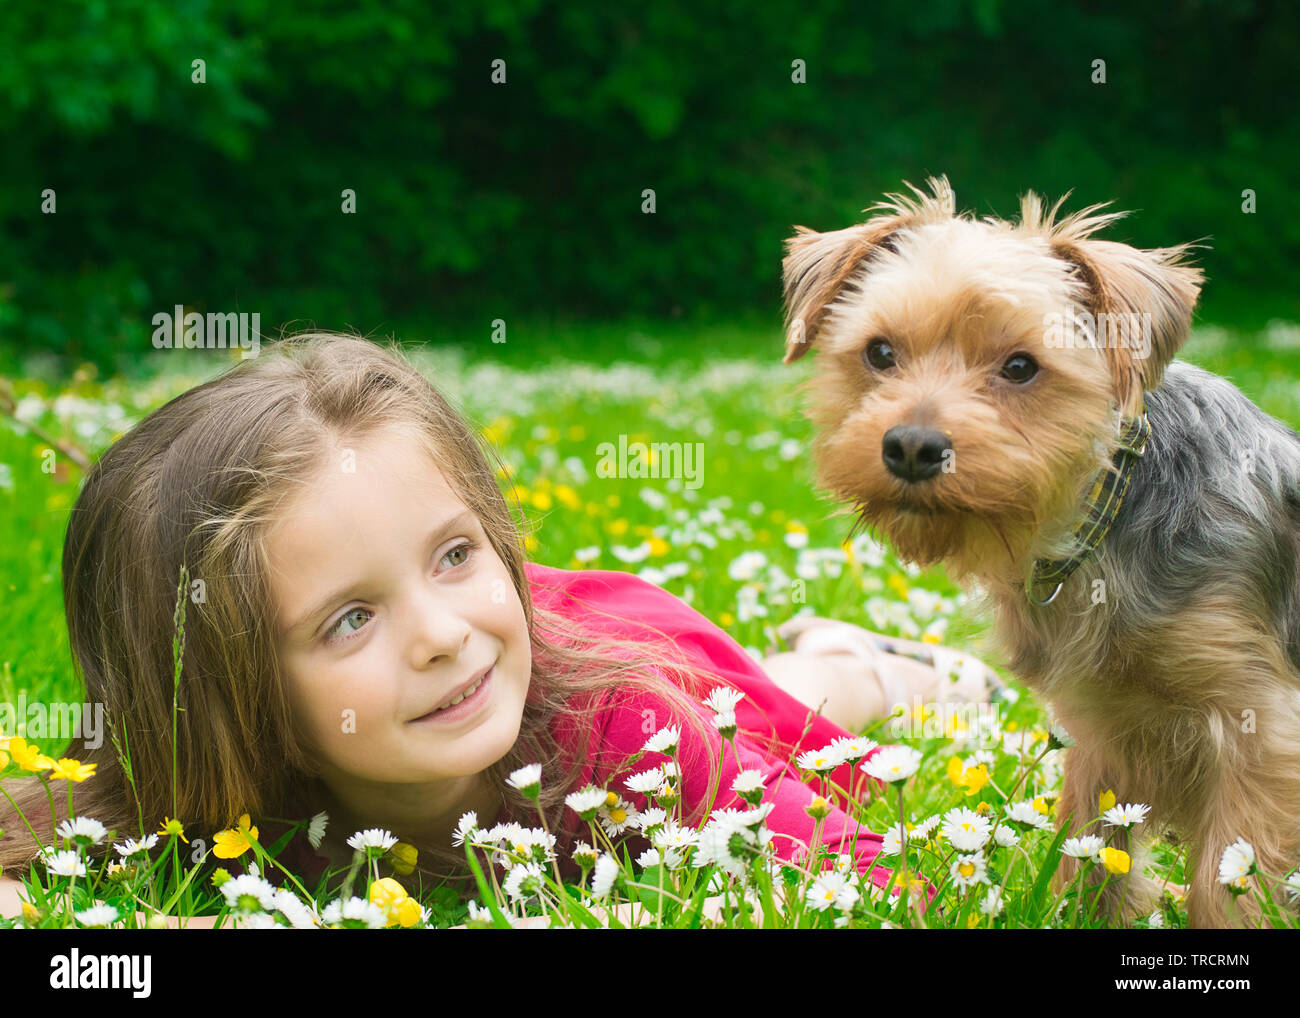 Little girl and pet dog laying in a field of daisies in the park. Stock Photo